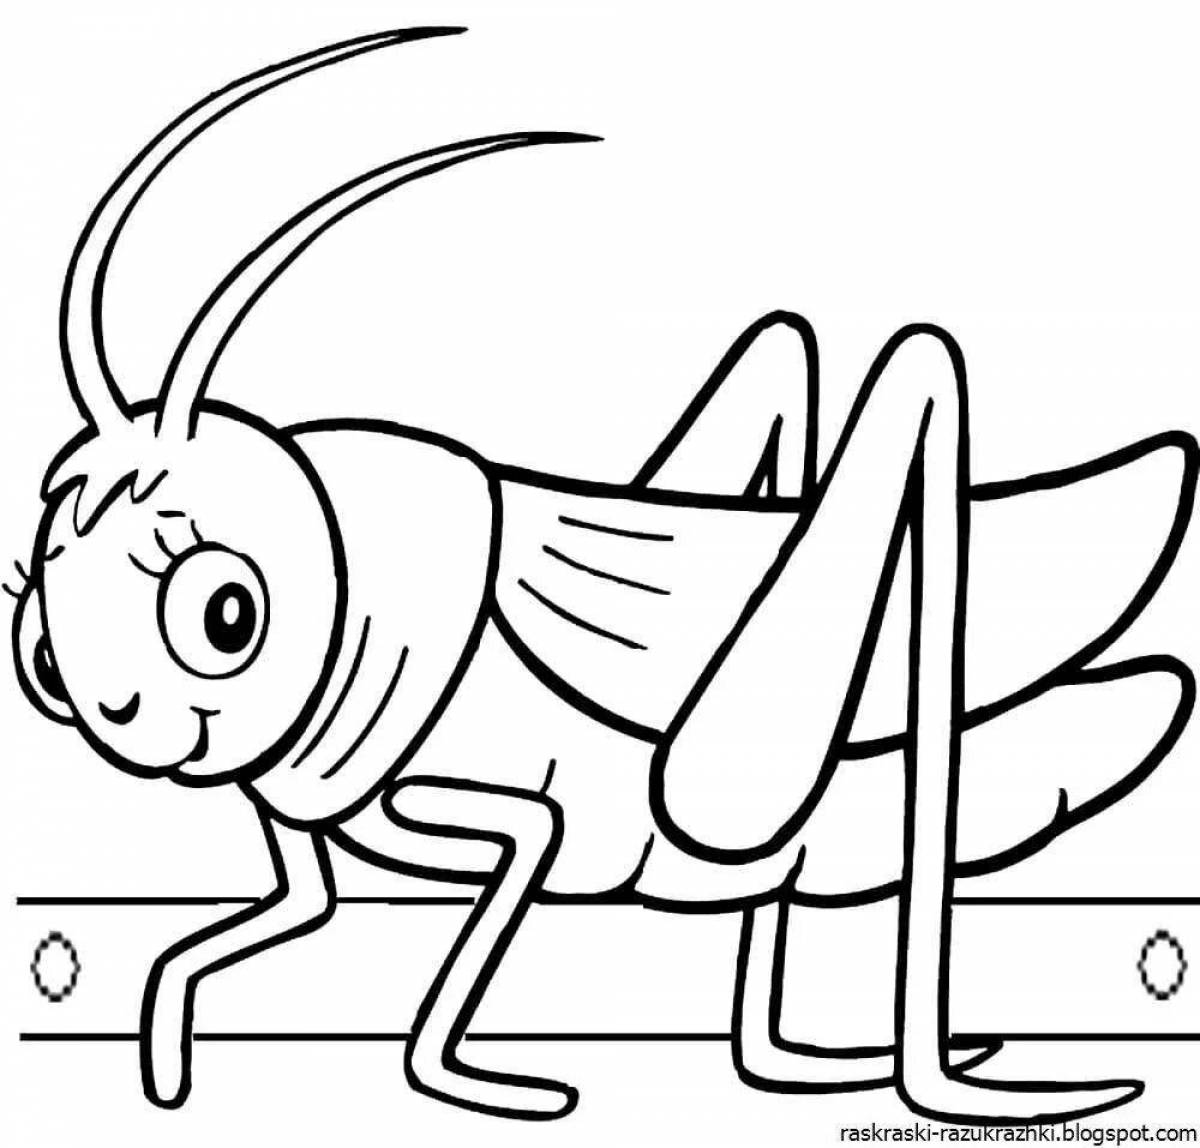 Insects for kids 6 7 #13